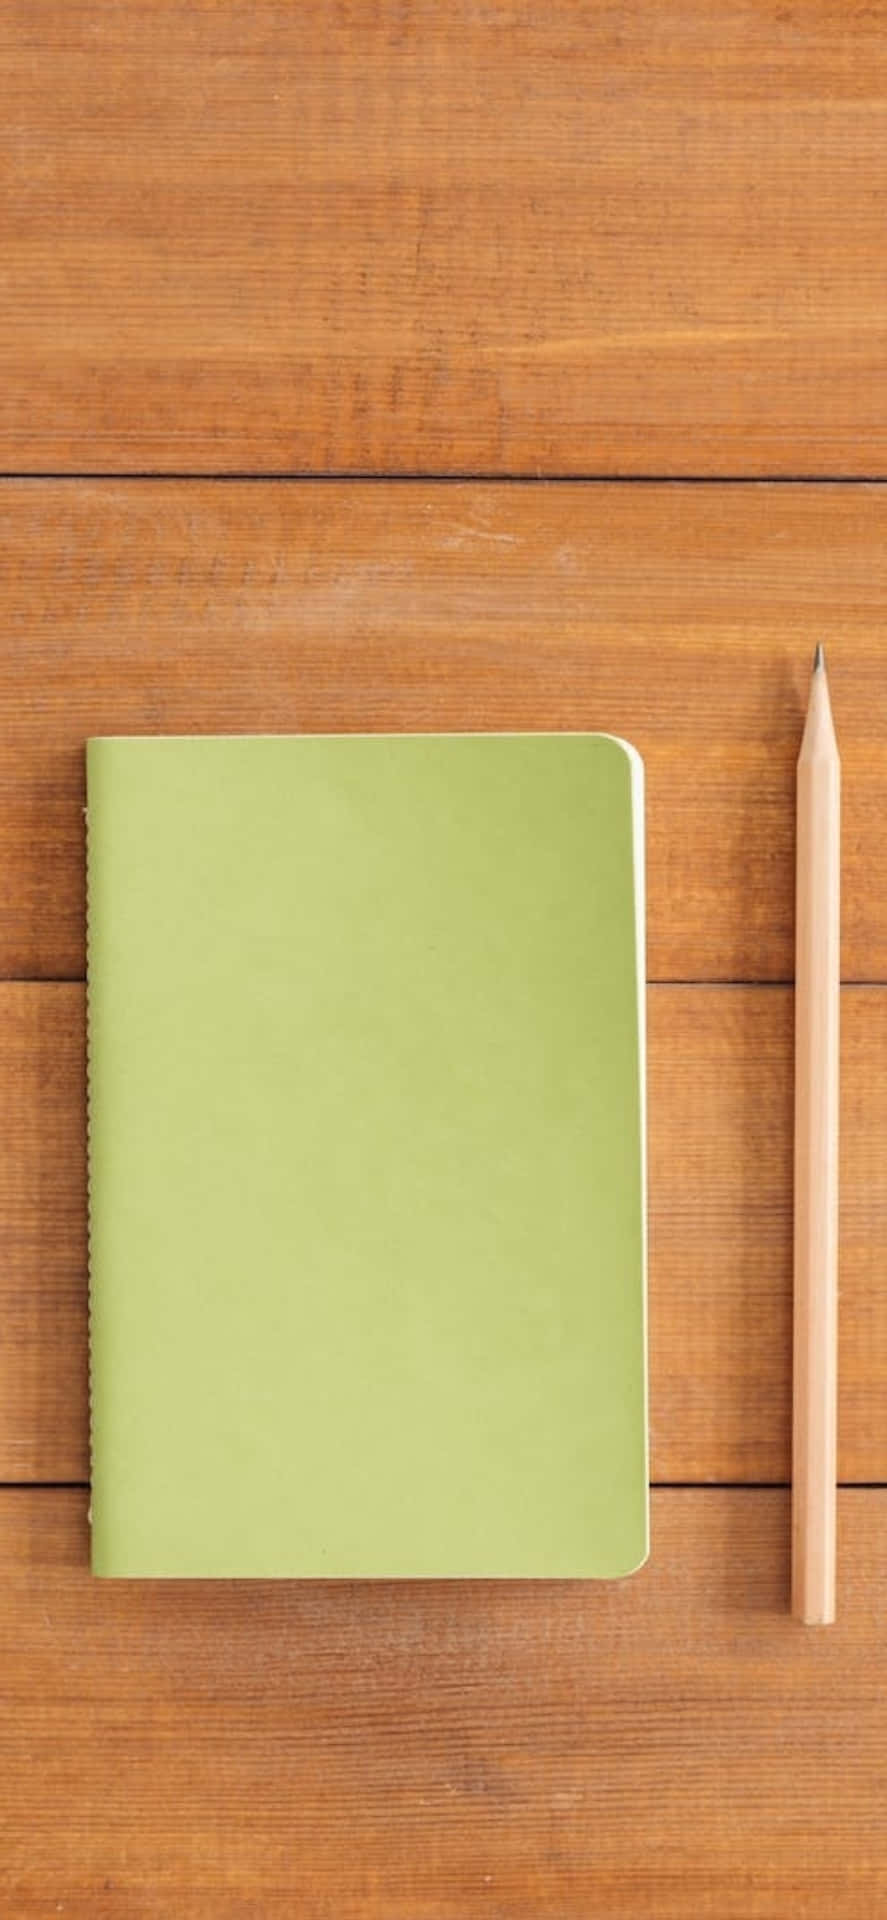 Iphone X Desk Background Notebook With A Pencil